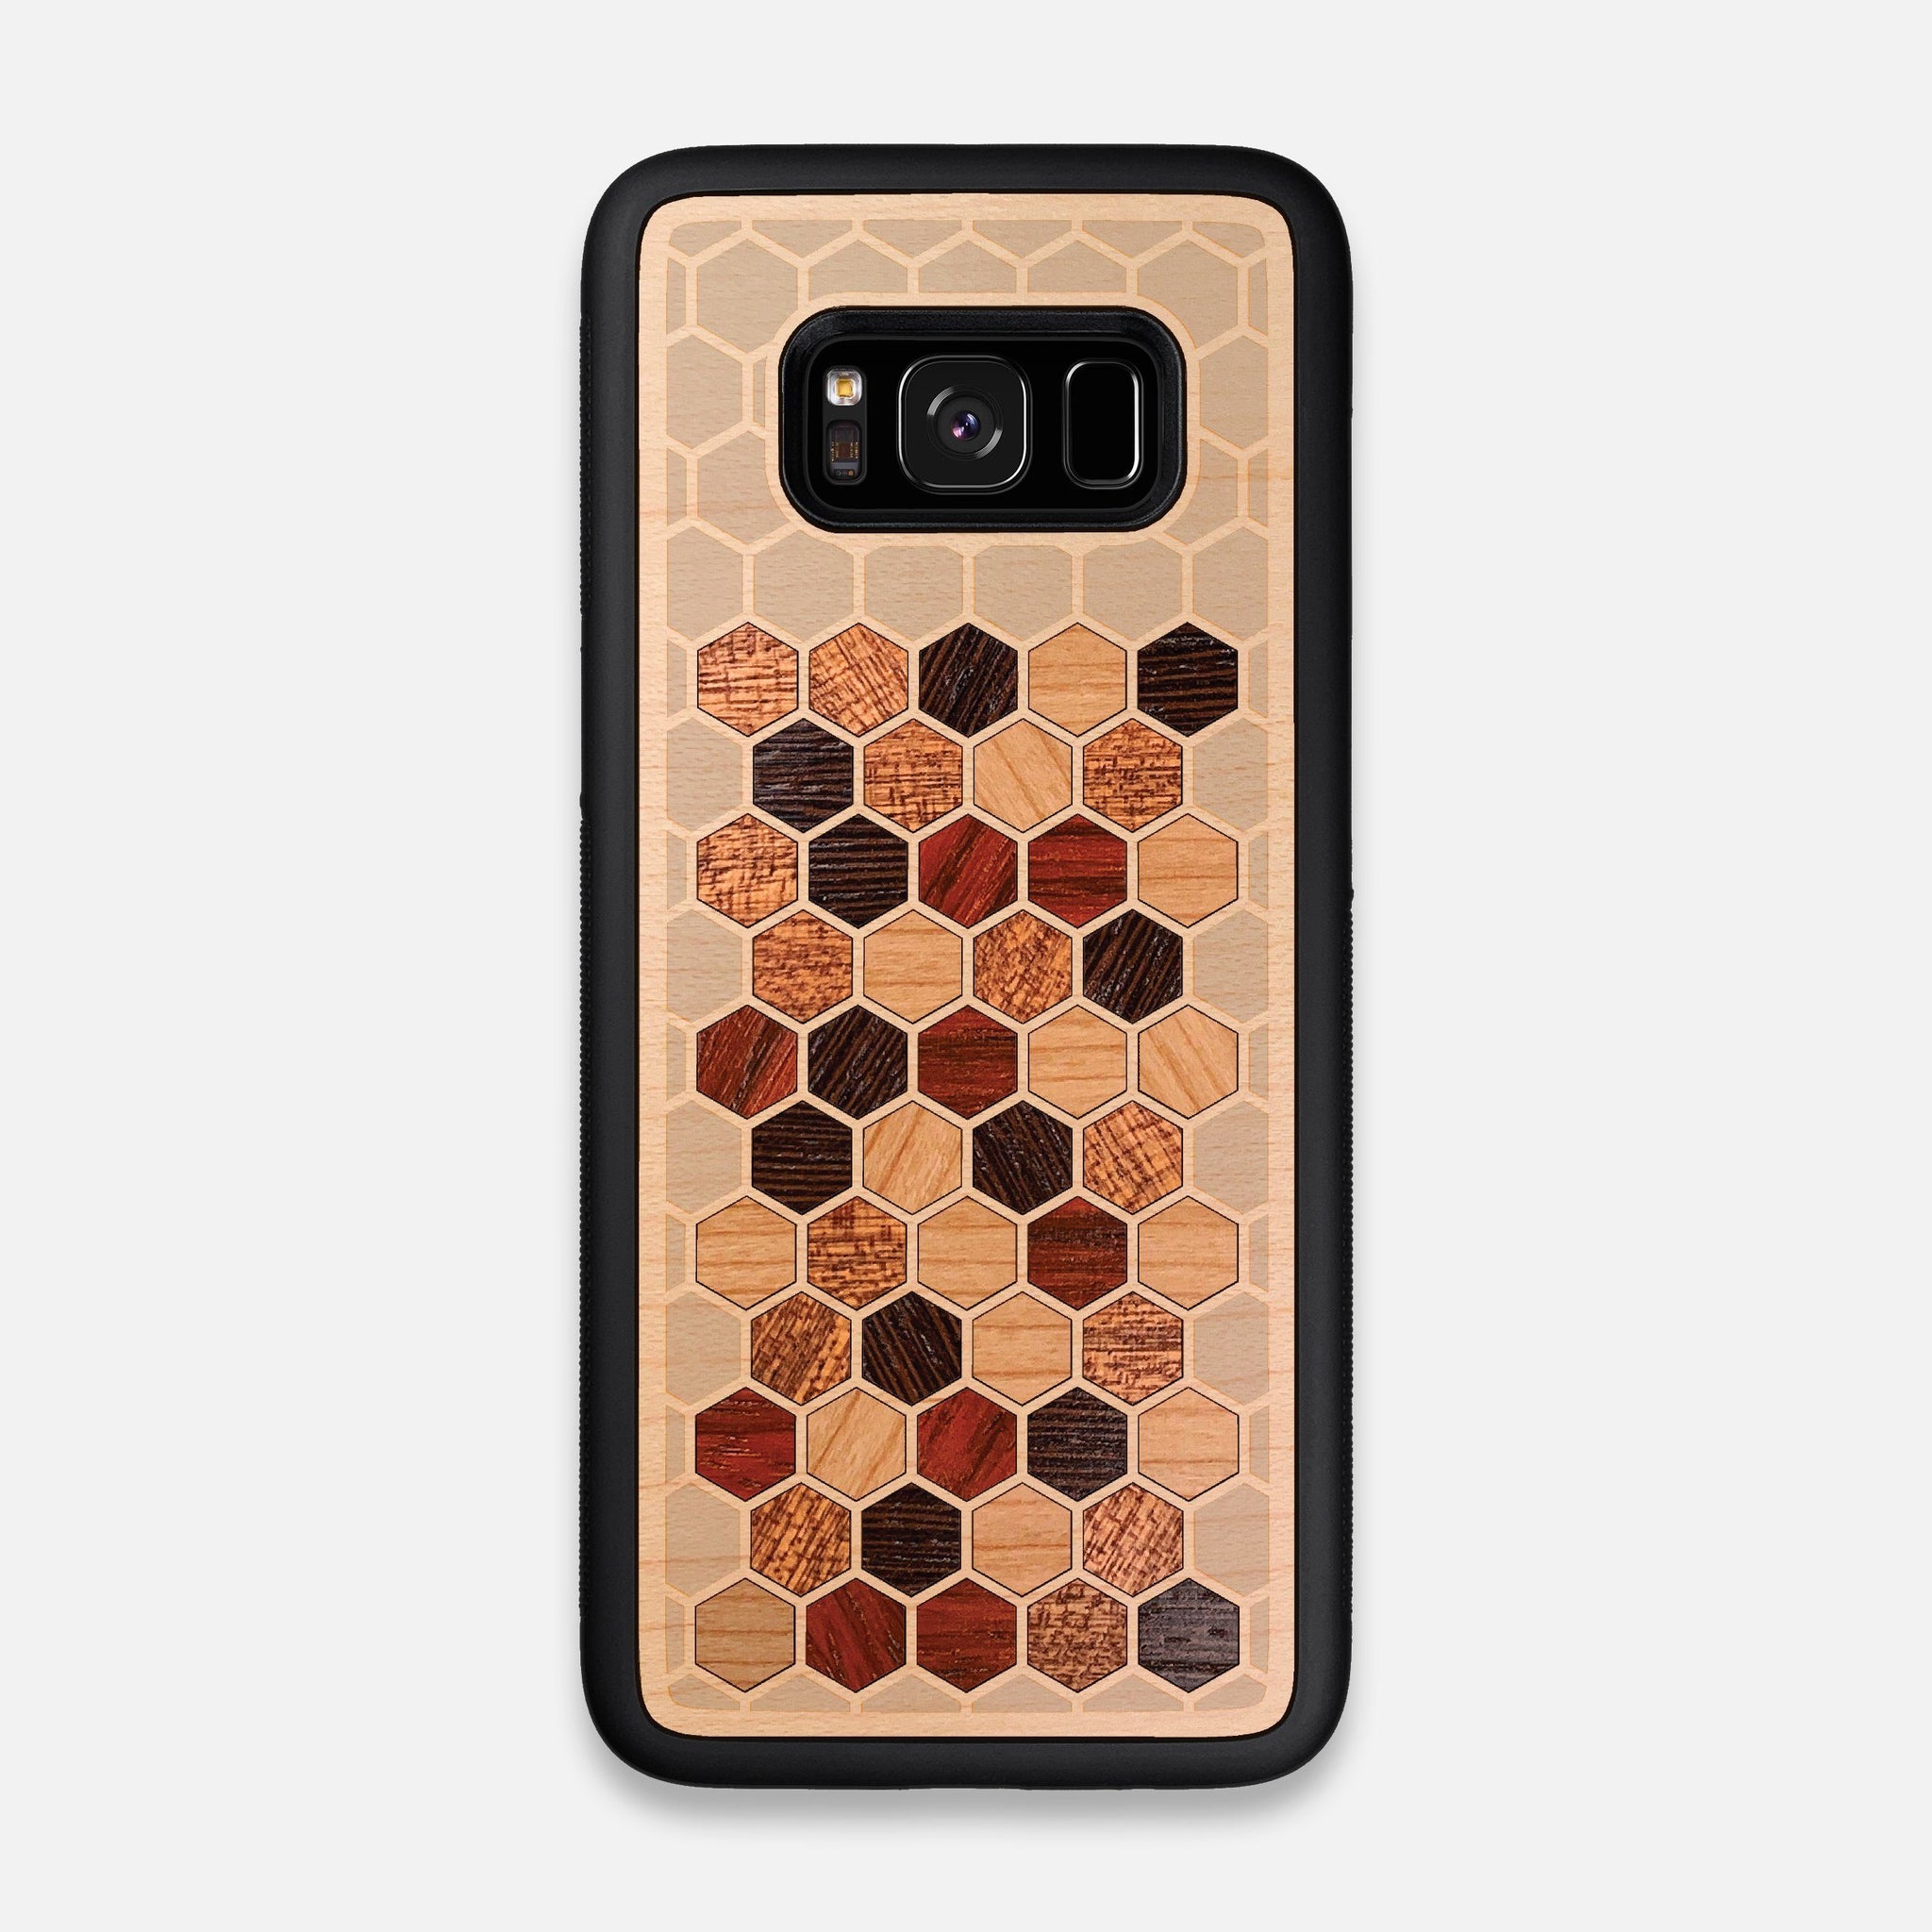 Front view of the Cellular Maple Wood Galaxy S8 Case by Keyway Designs